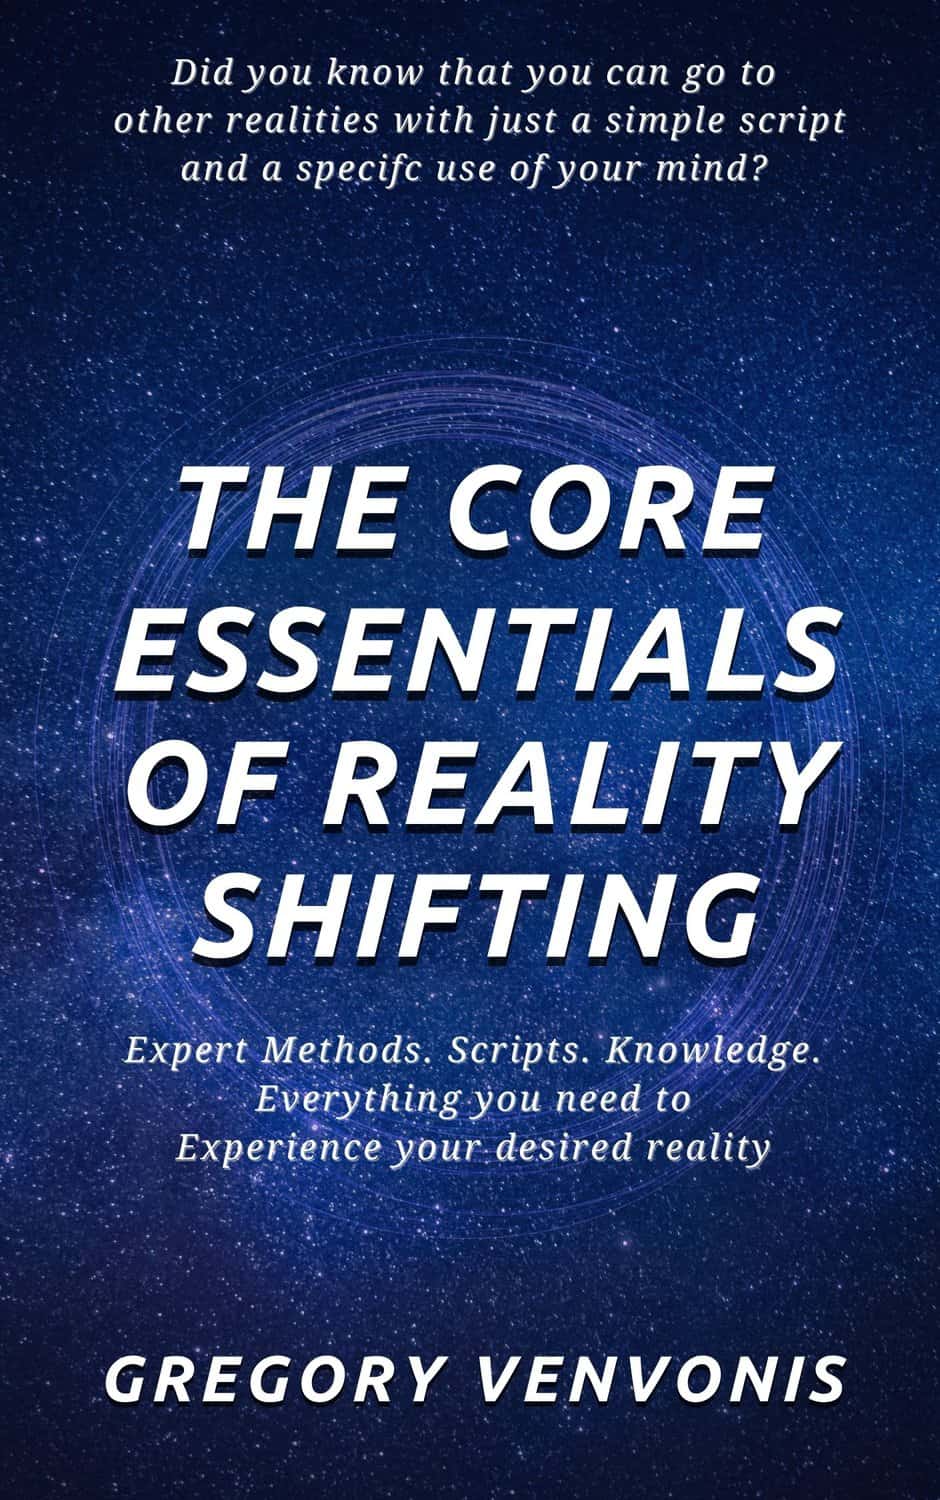 The Core Essentials of Reality Shifting - Vowlenu